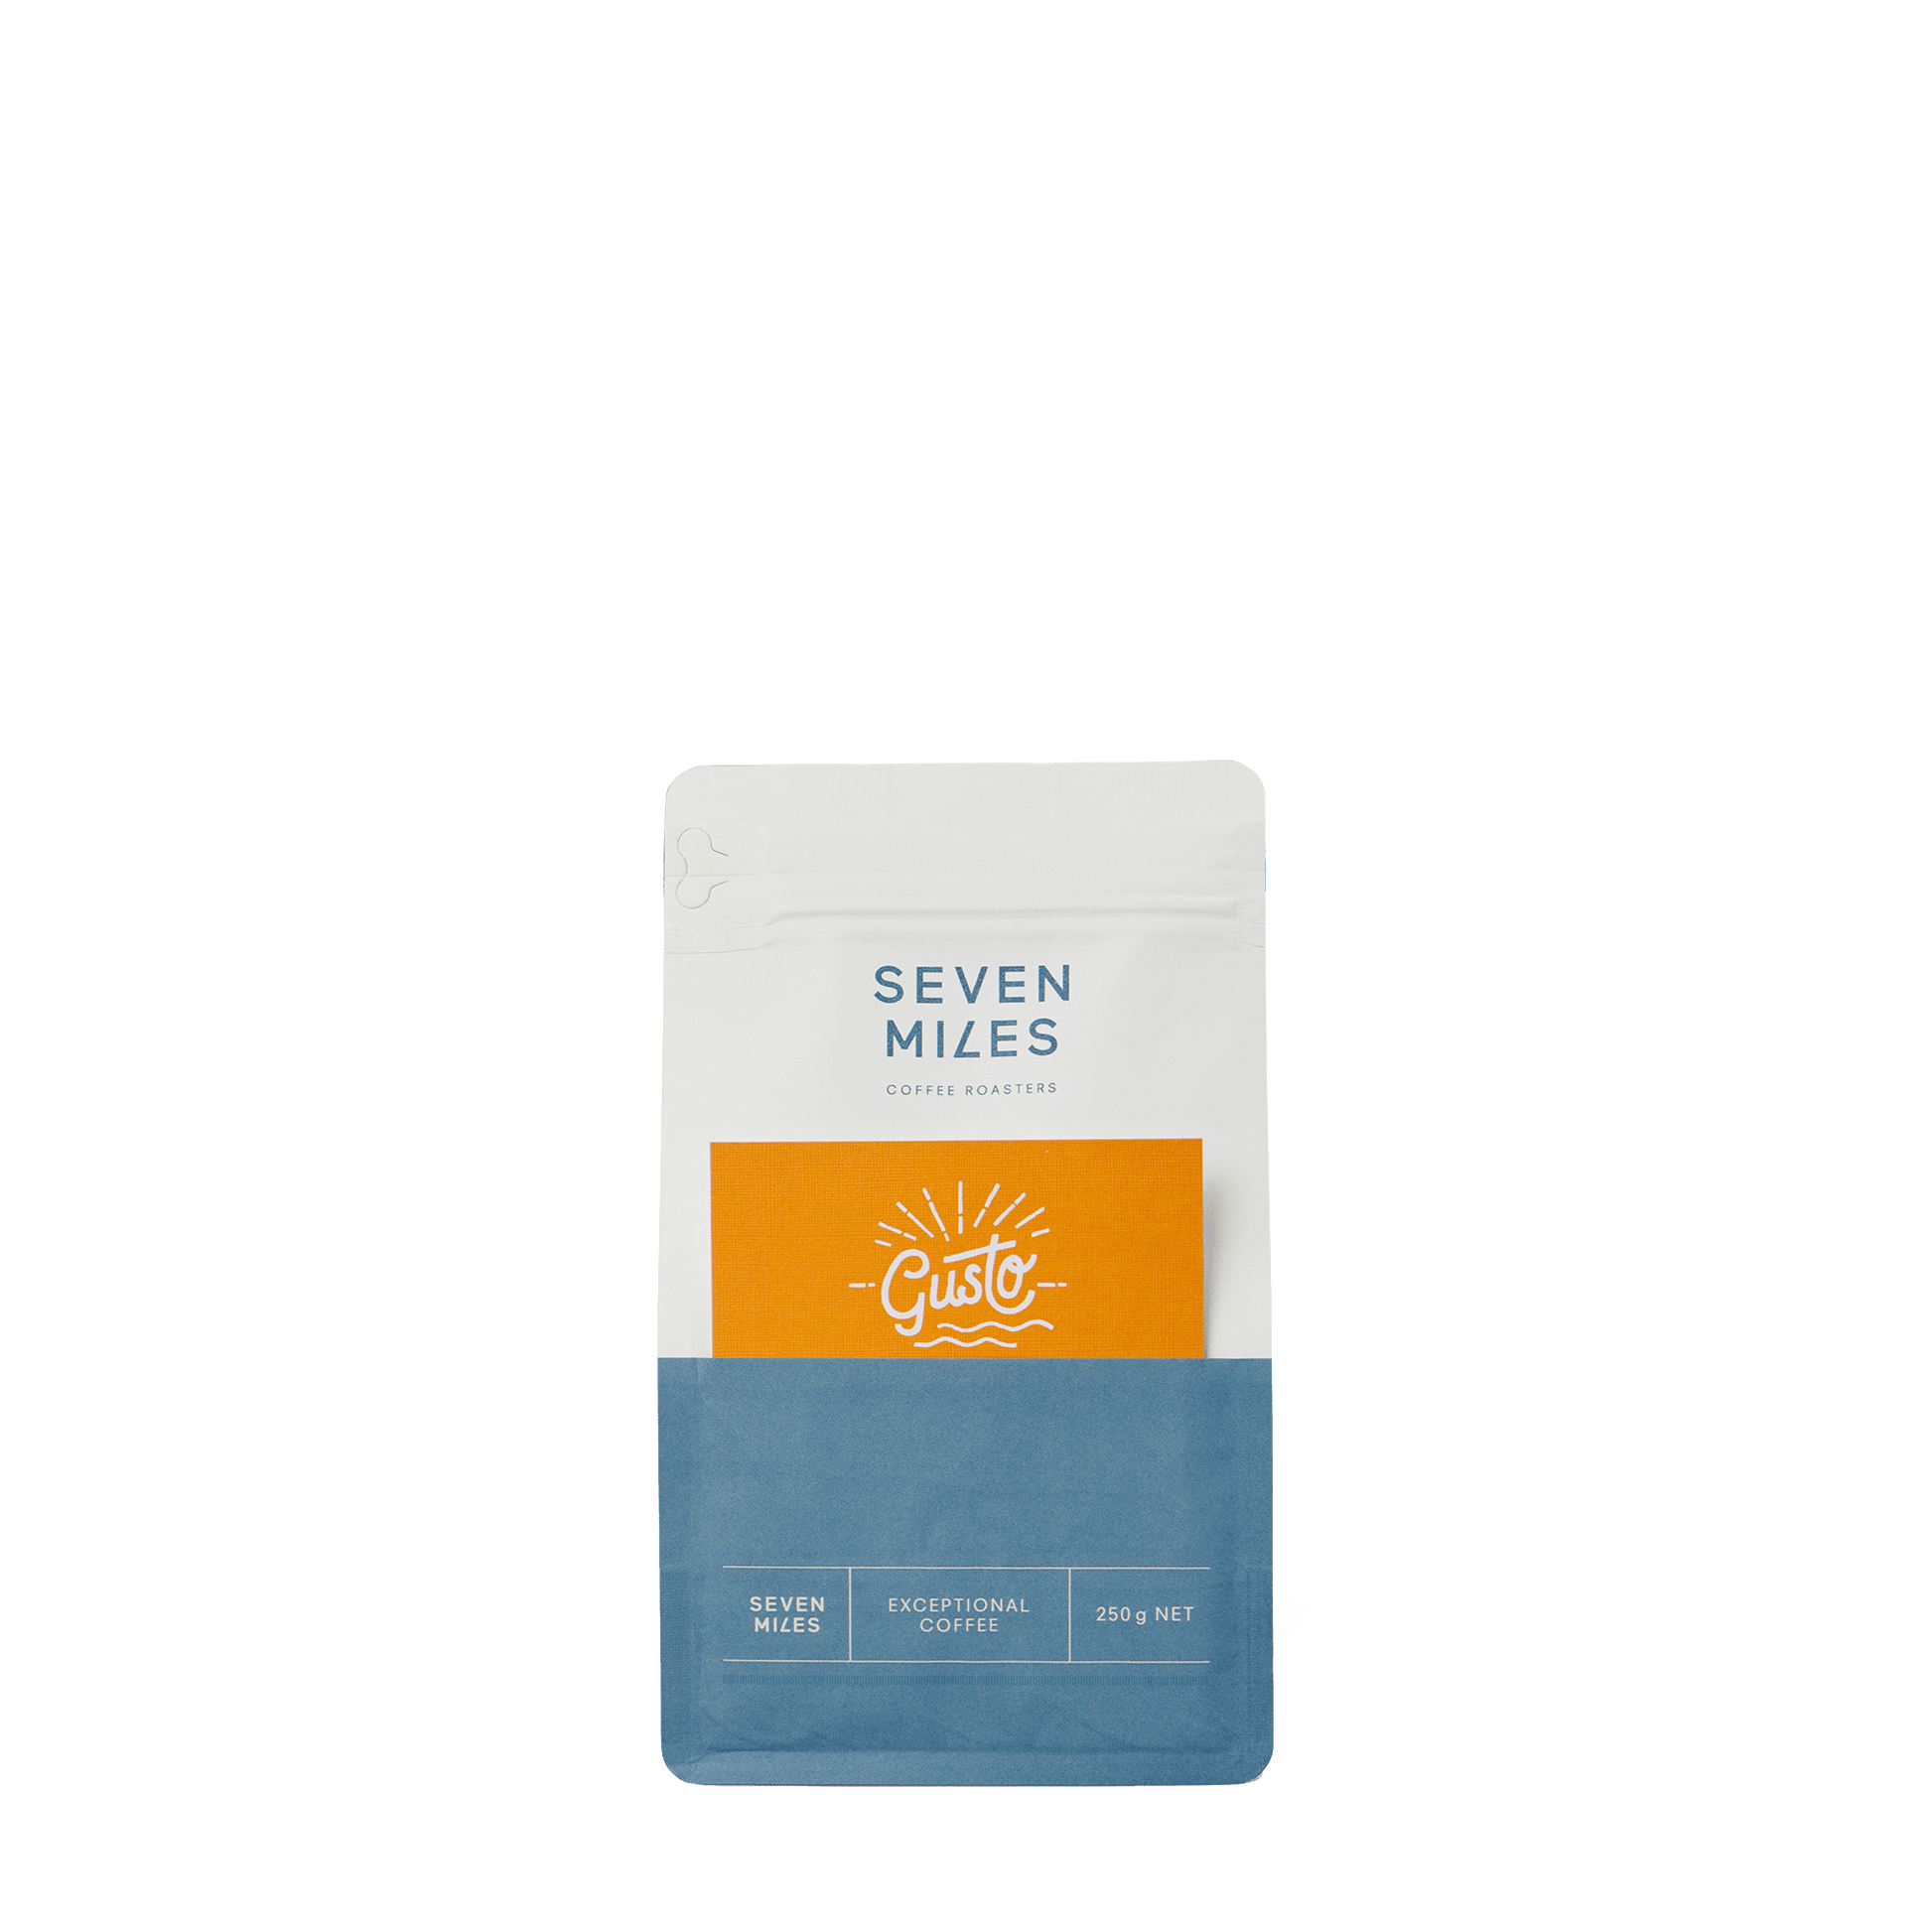 The Seven Miles Gusto 250g coffee blend features the smooth, sweet flavours of the best Latin American coffee beans. Gusto is intense but smooth with tasting notes of Caramel, Hazelnut & Sweet Spices. As a flat white, latte or cappuccino, it makes a beautiful milk coffee with the flavours cutting through.